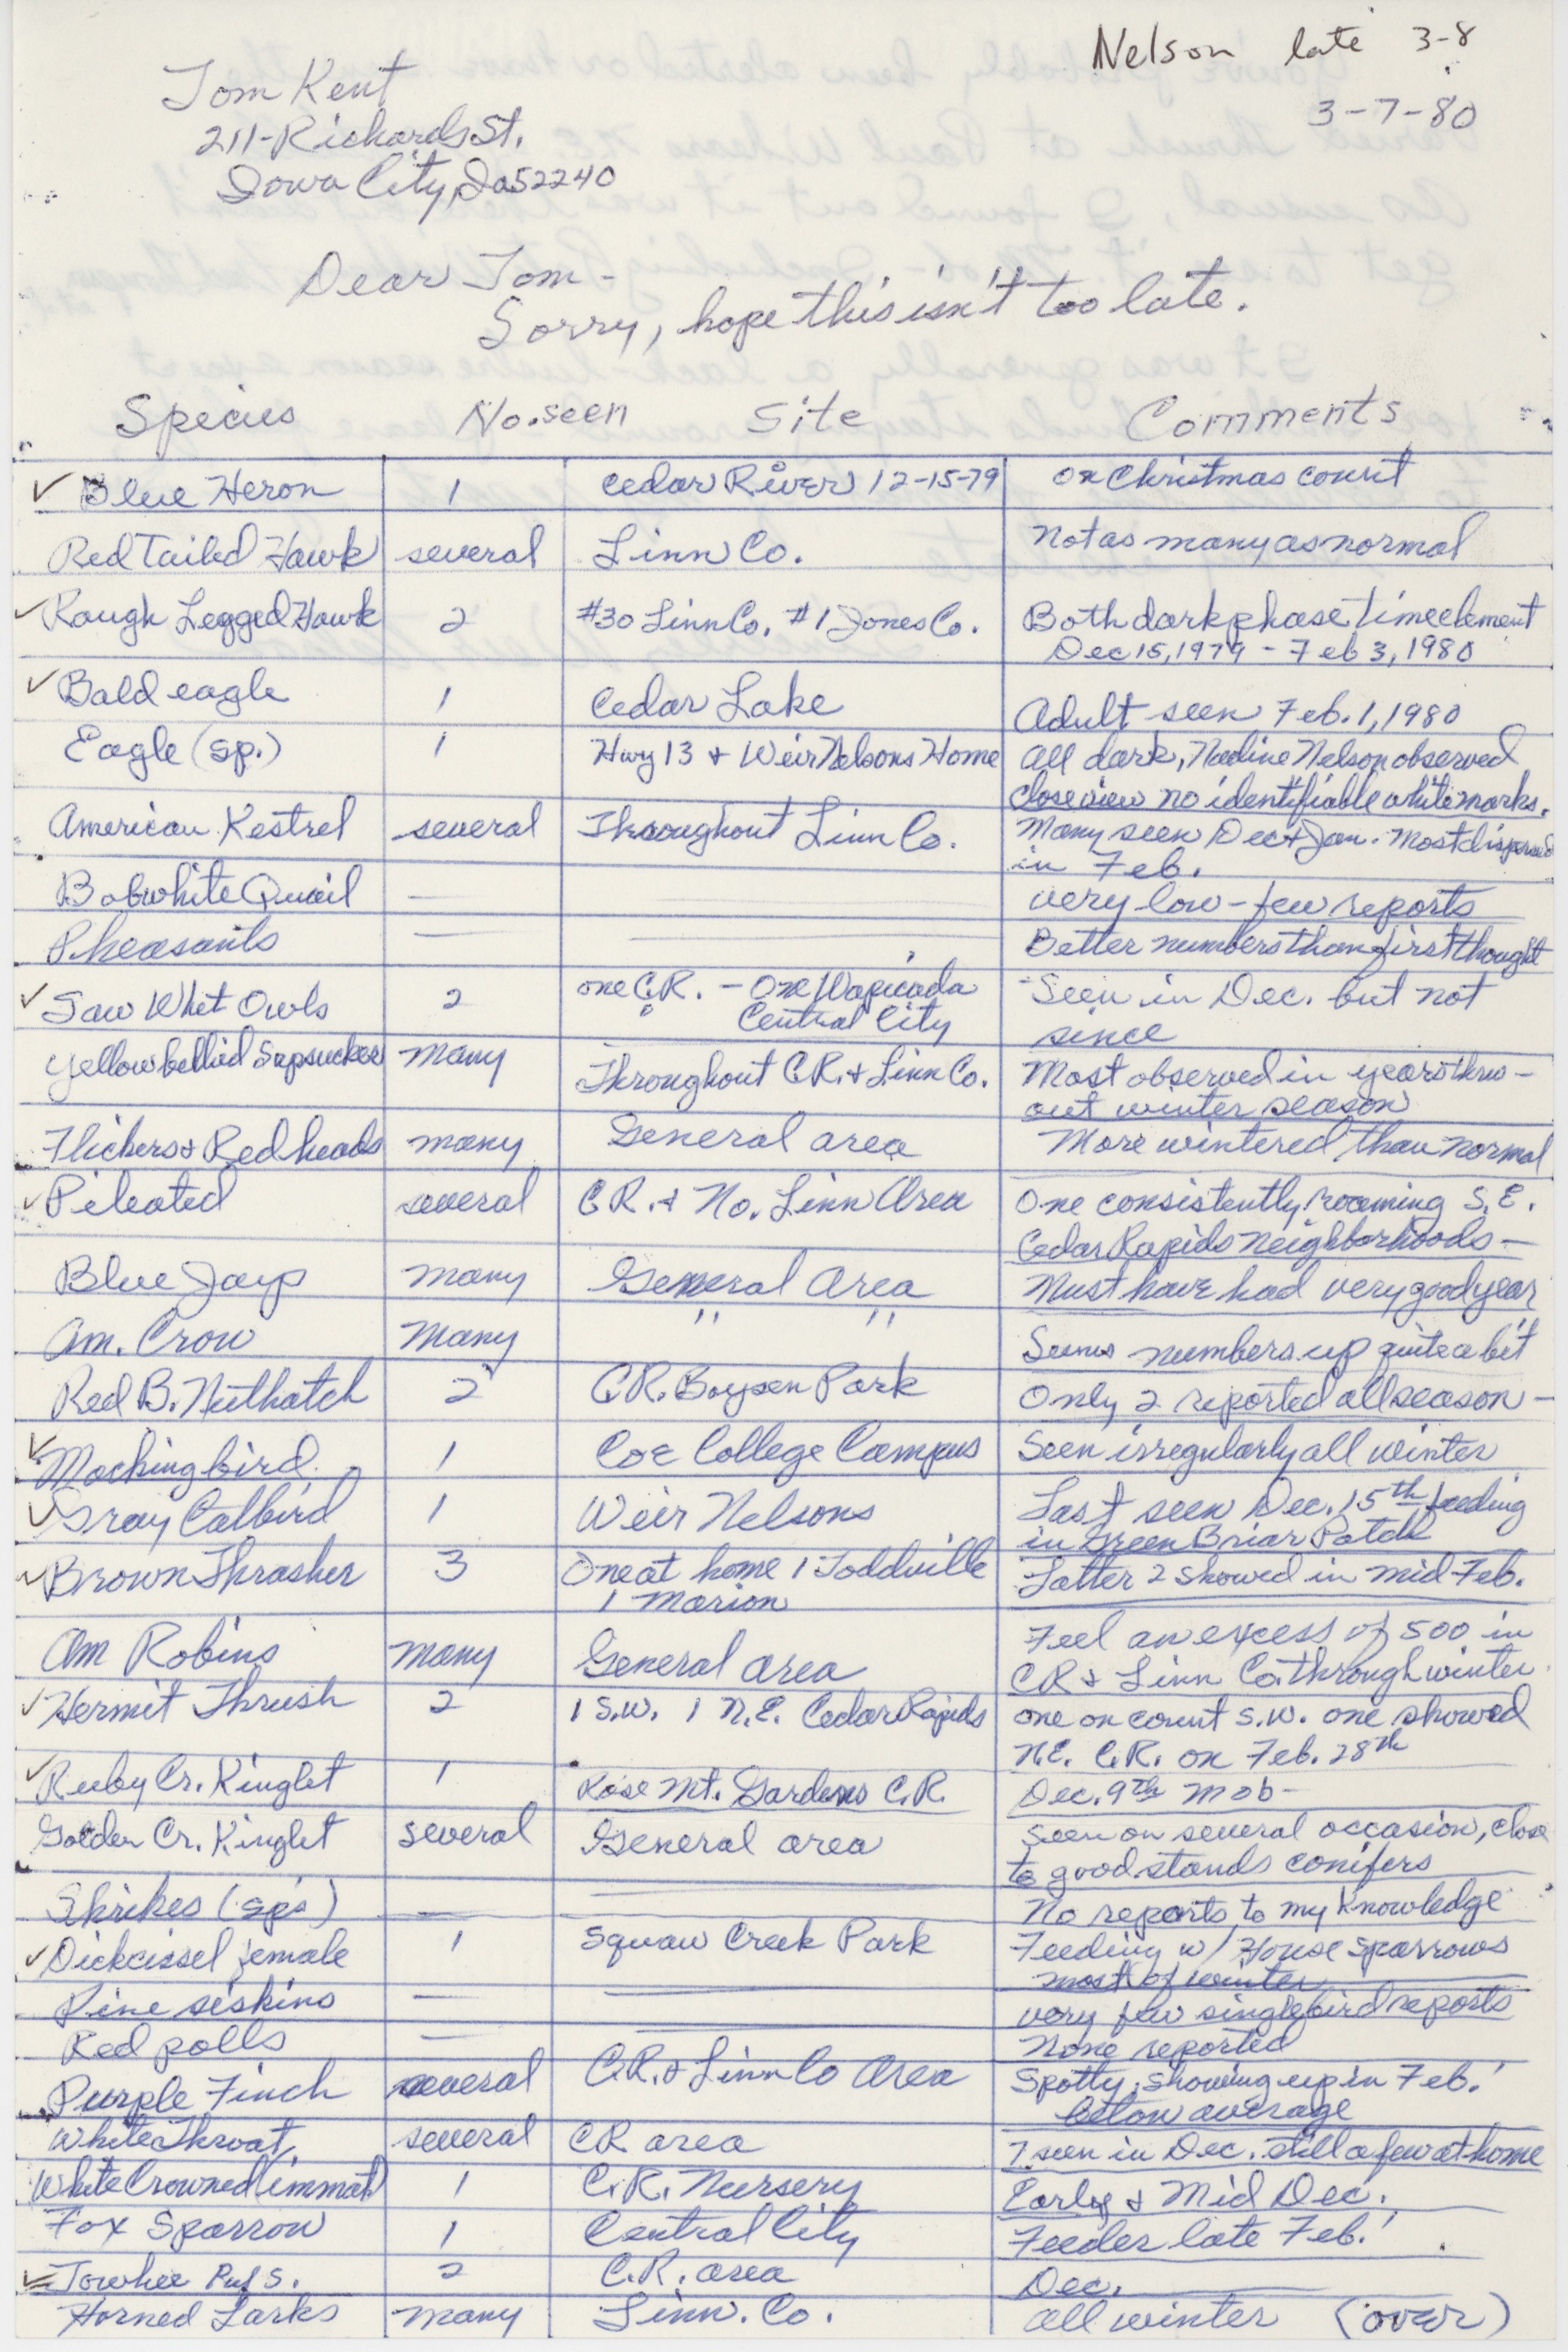 Field notes contributed by Weir Nelson, March 7, 1980